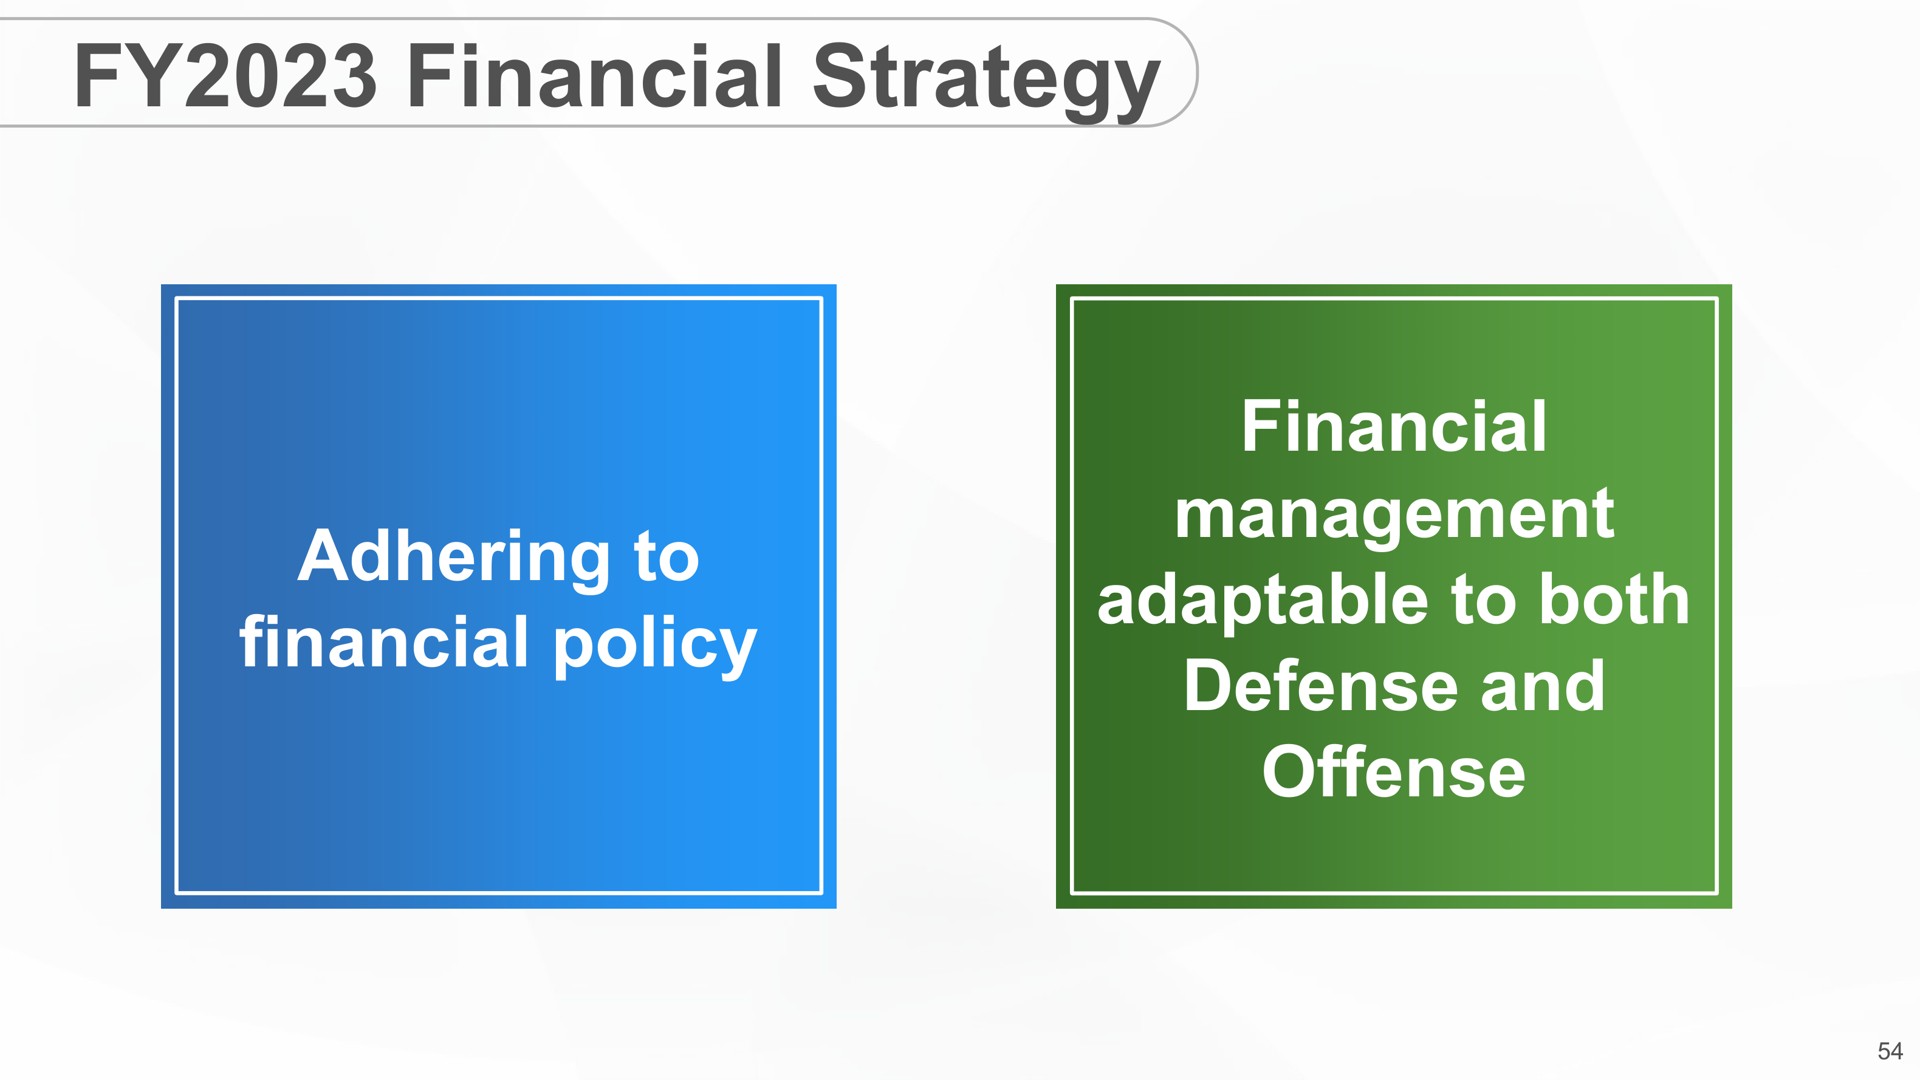 financial strategy adhering to financial policy financial management adaptable to both defense and offense | SoftBank